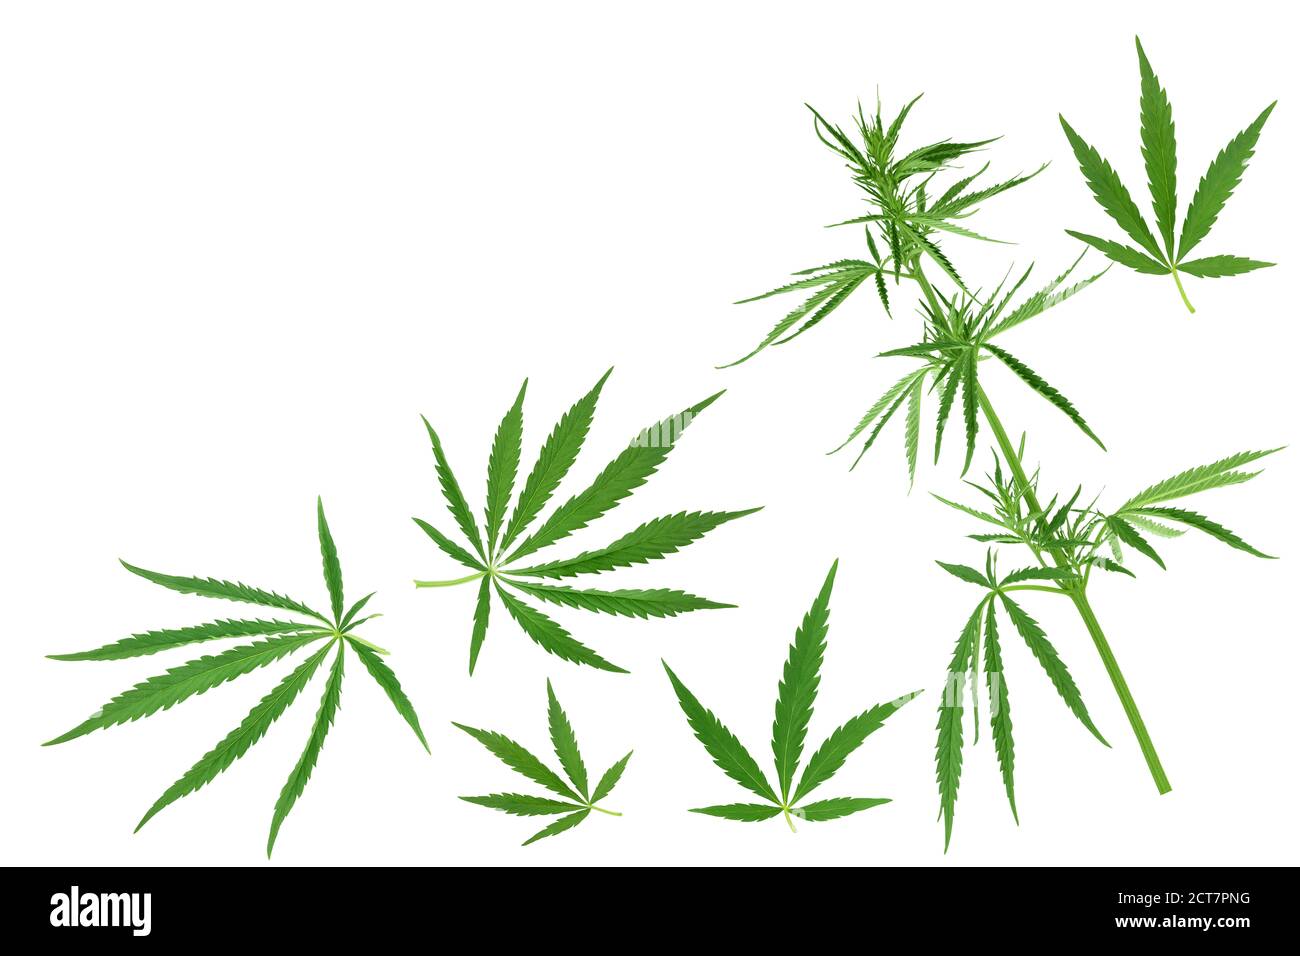 Cannabis leaf isolated on white background with clipping path and full depth of field, Top view with copy space for your text. Flat lay pattern Stock Photo